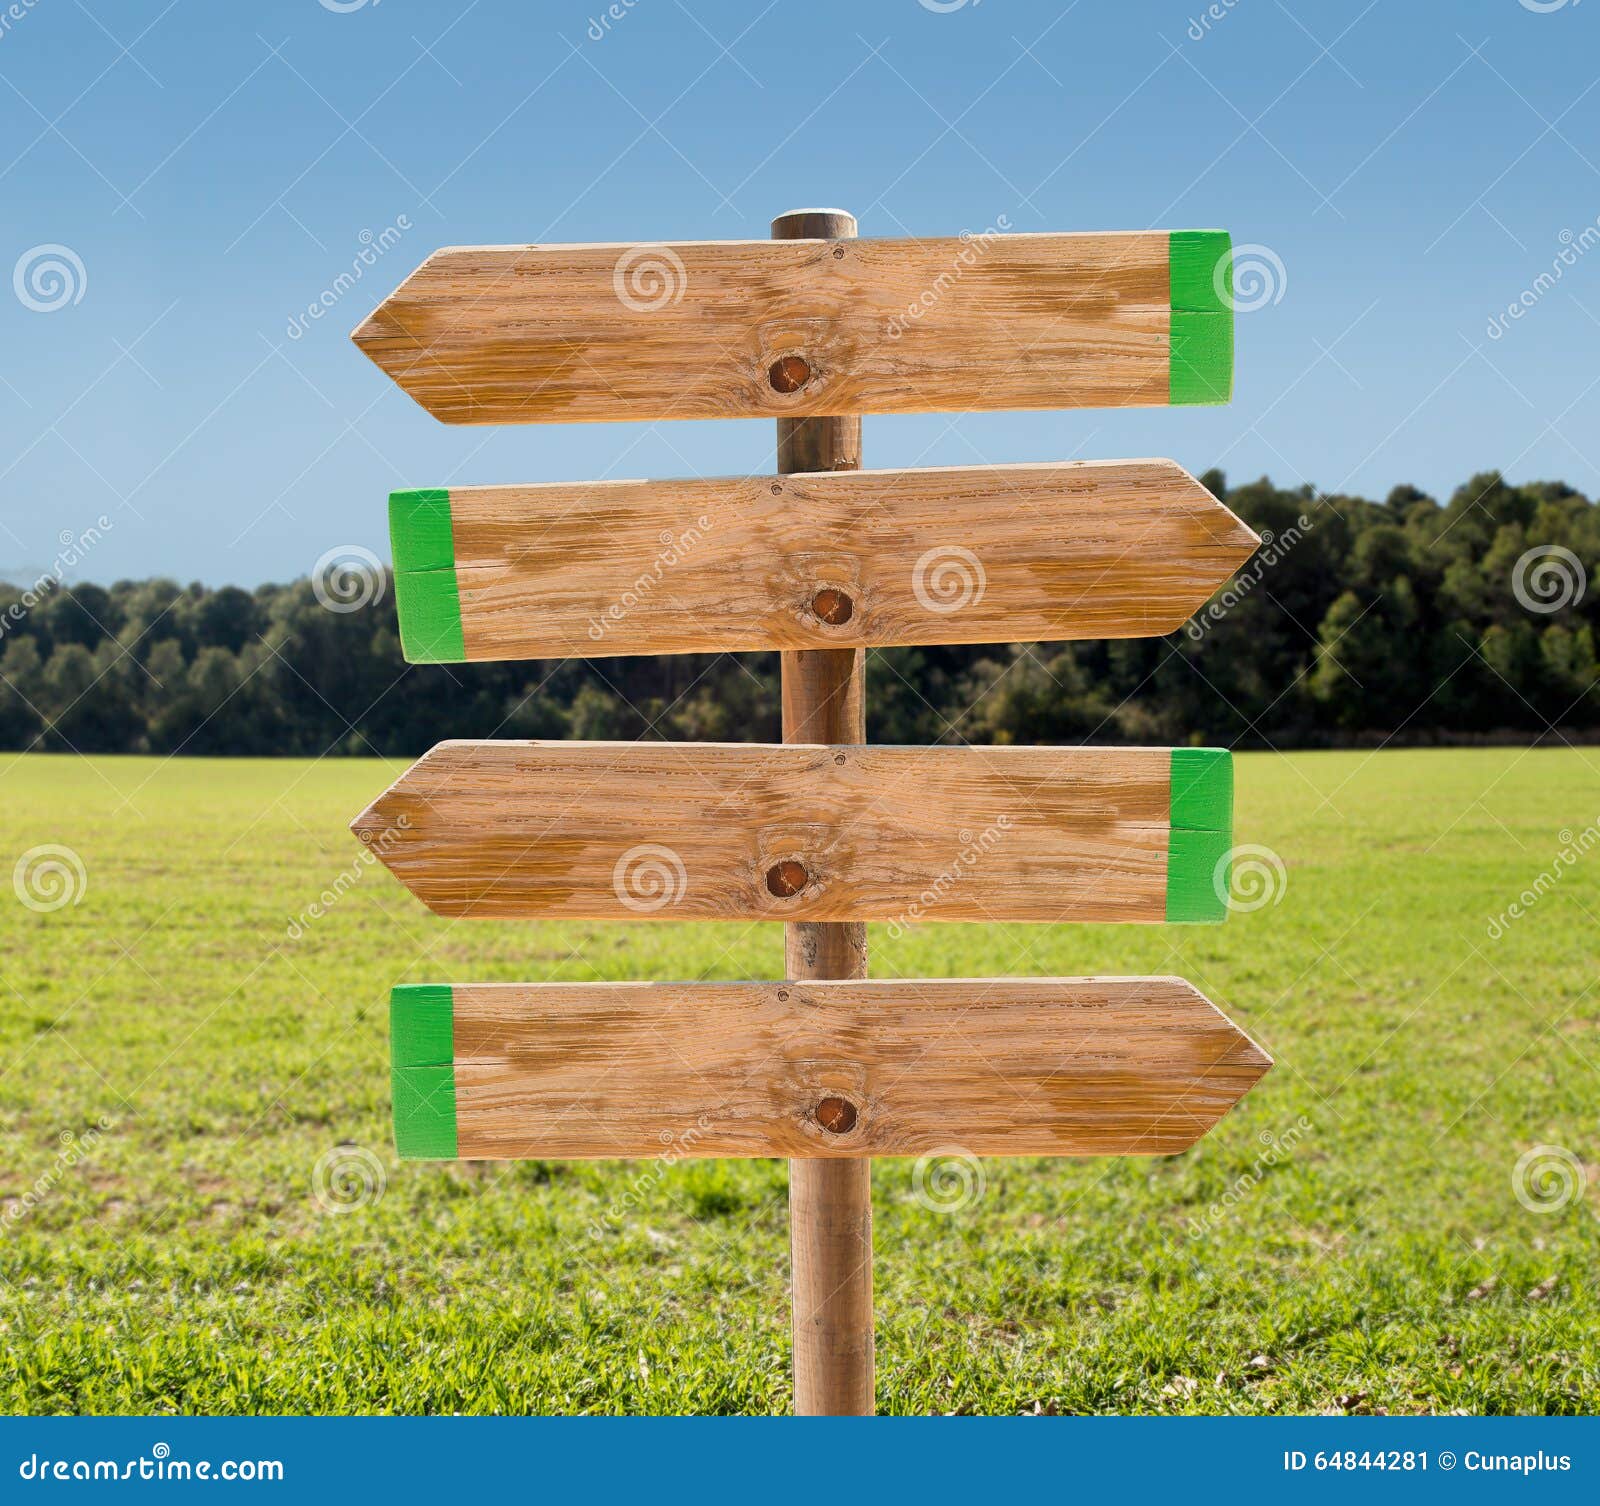 Wooden Signpost Stock Image Image Of Choice Directional 64844281